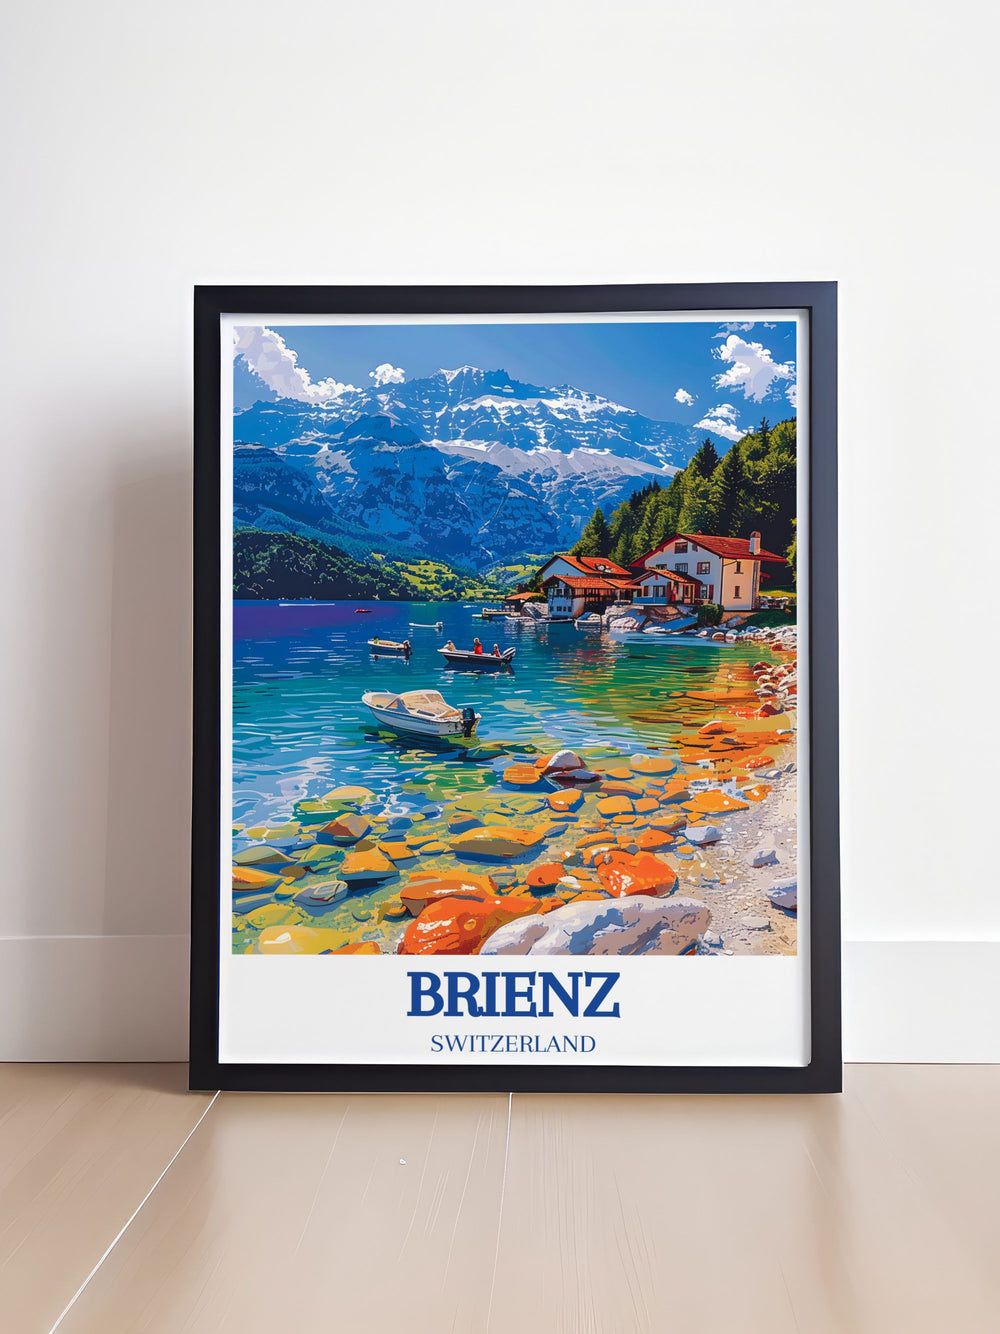 Retro travel poster featuring Lake Brienz and Brienzer Rothorn highlighting the majestic scenery of the Swiss Alps this captivating artwork is perfect for nature lovers and adds a touch of elegance to any living space